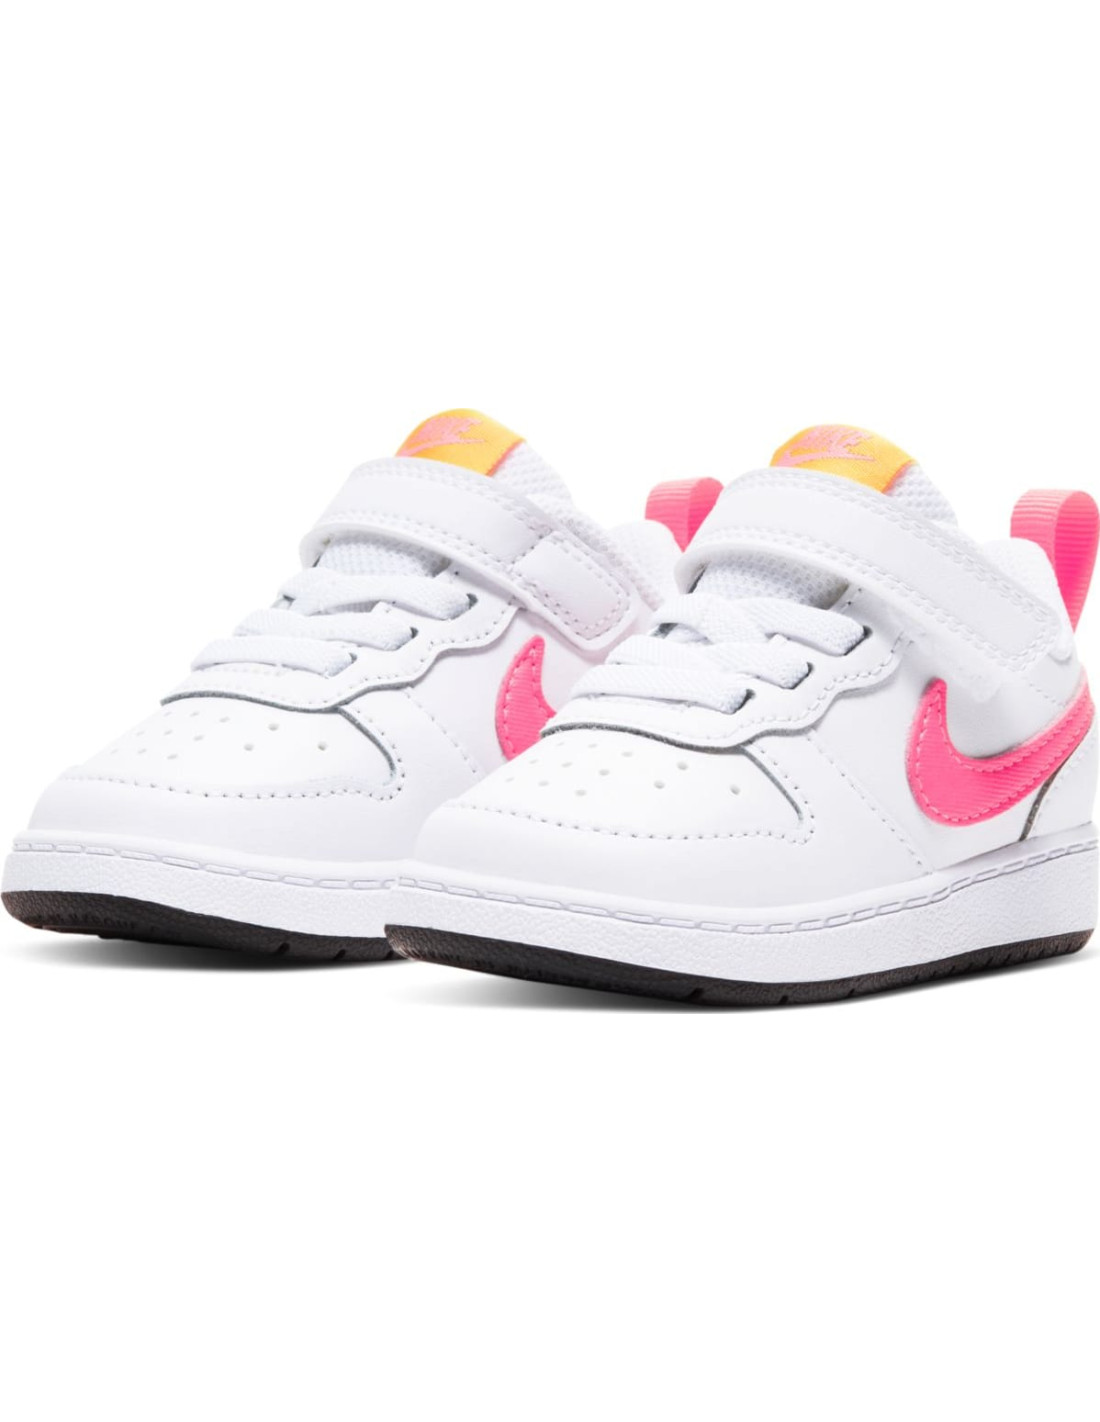 NIKE COURT BOROUGH LOW 2 BABY TODDL